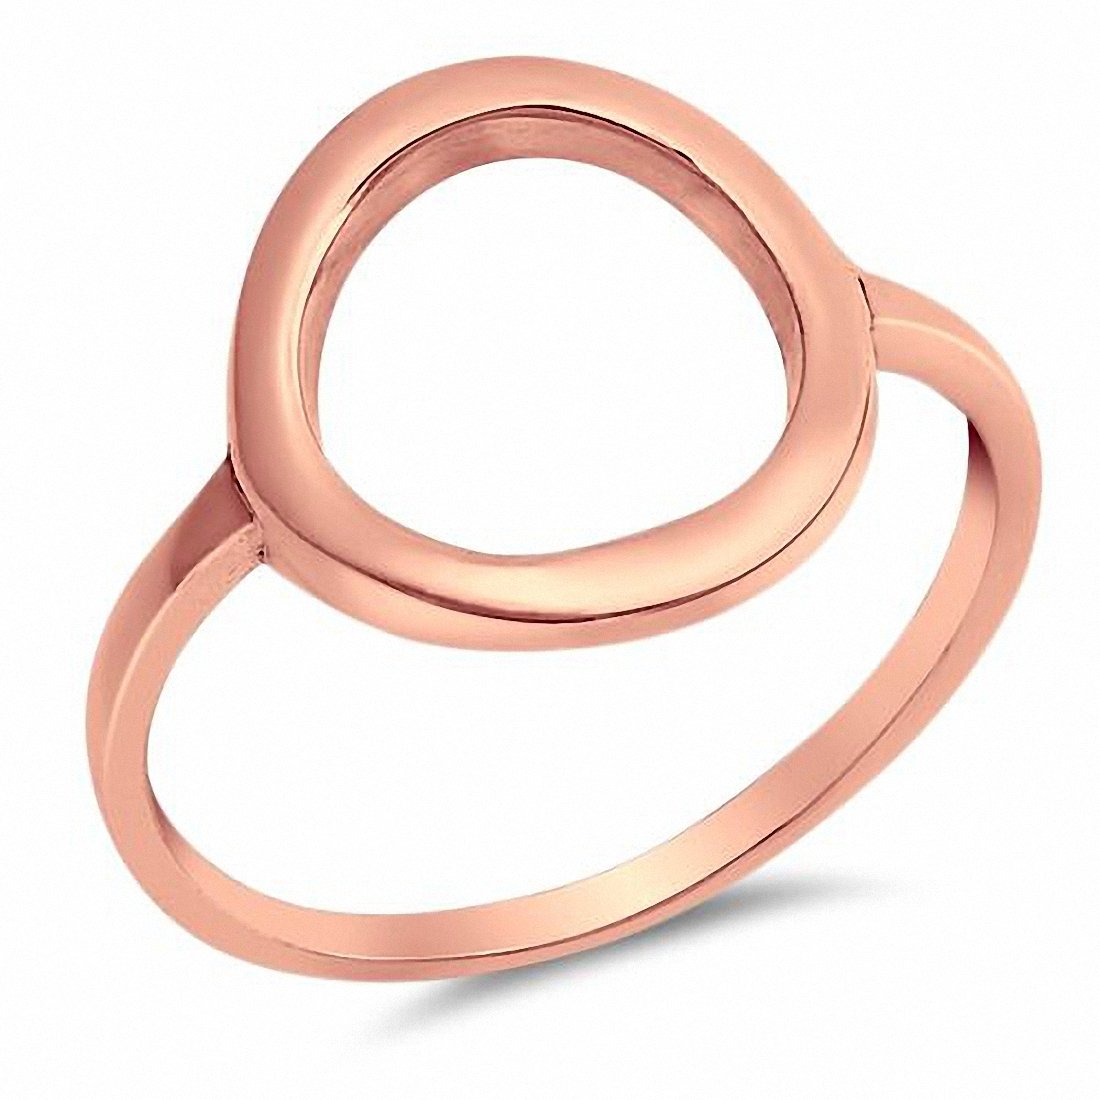 Circle O Simple Plain Open Ring Band Rose Tone 925 Sterling Silver